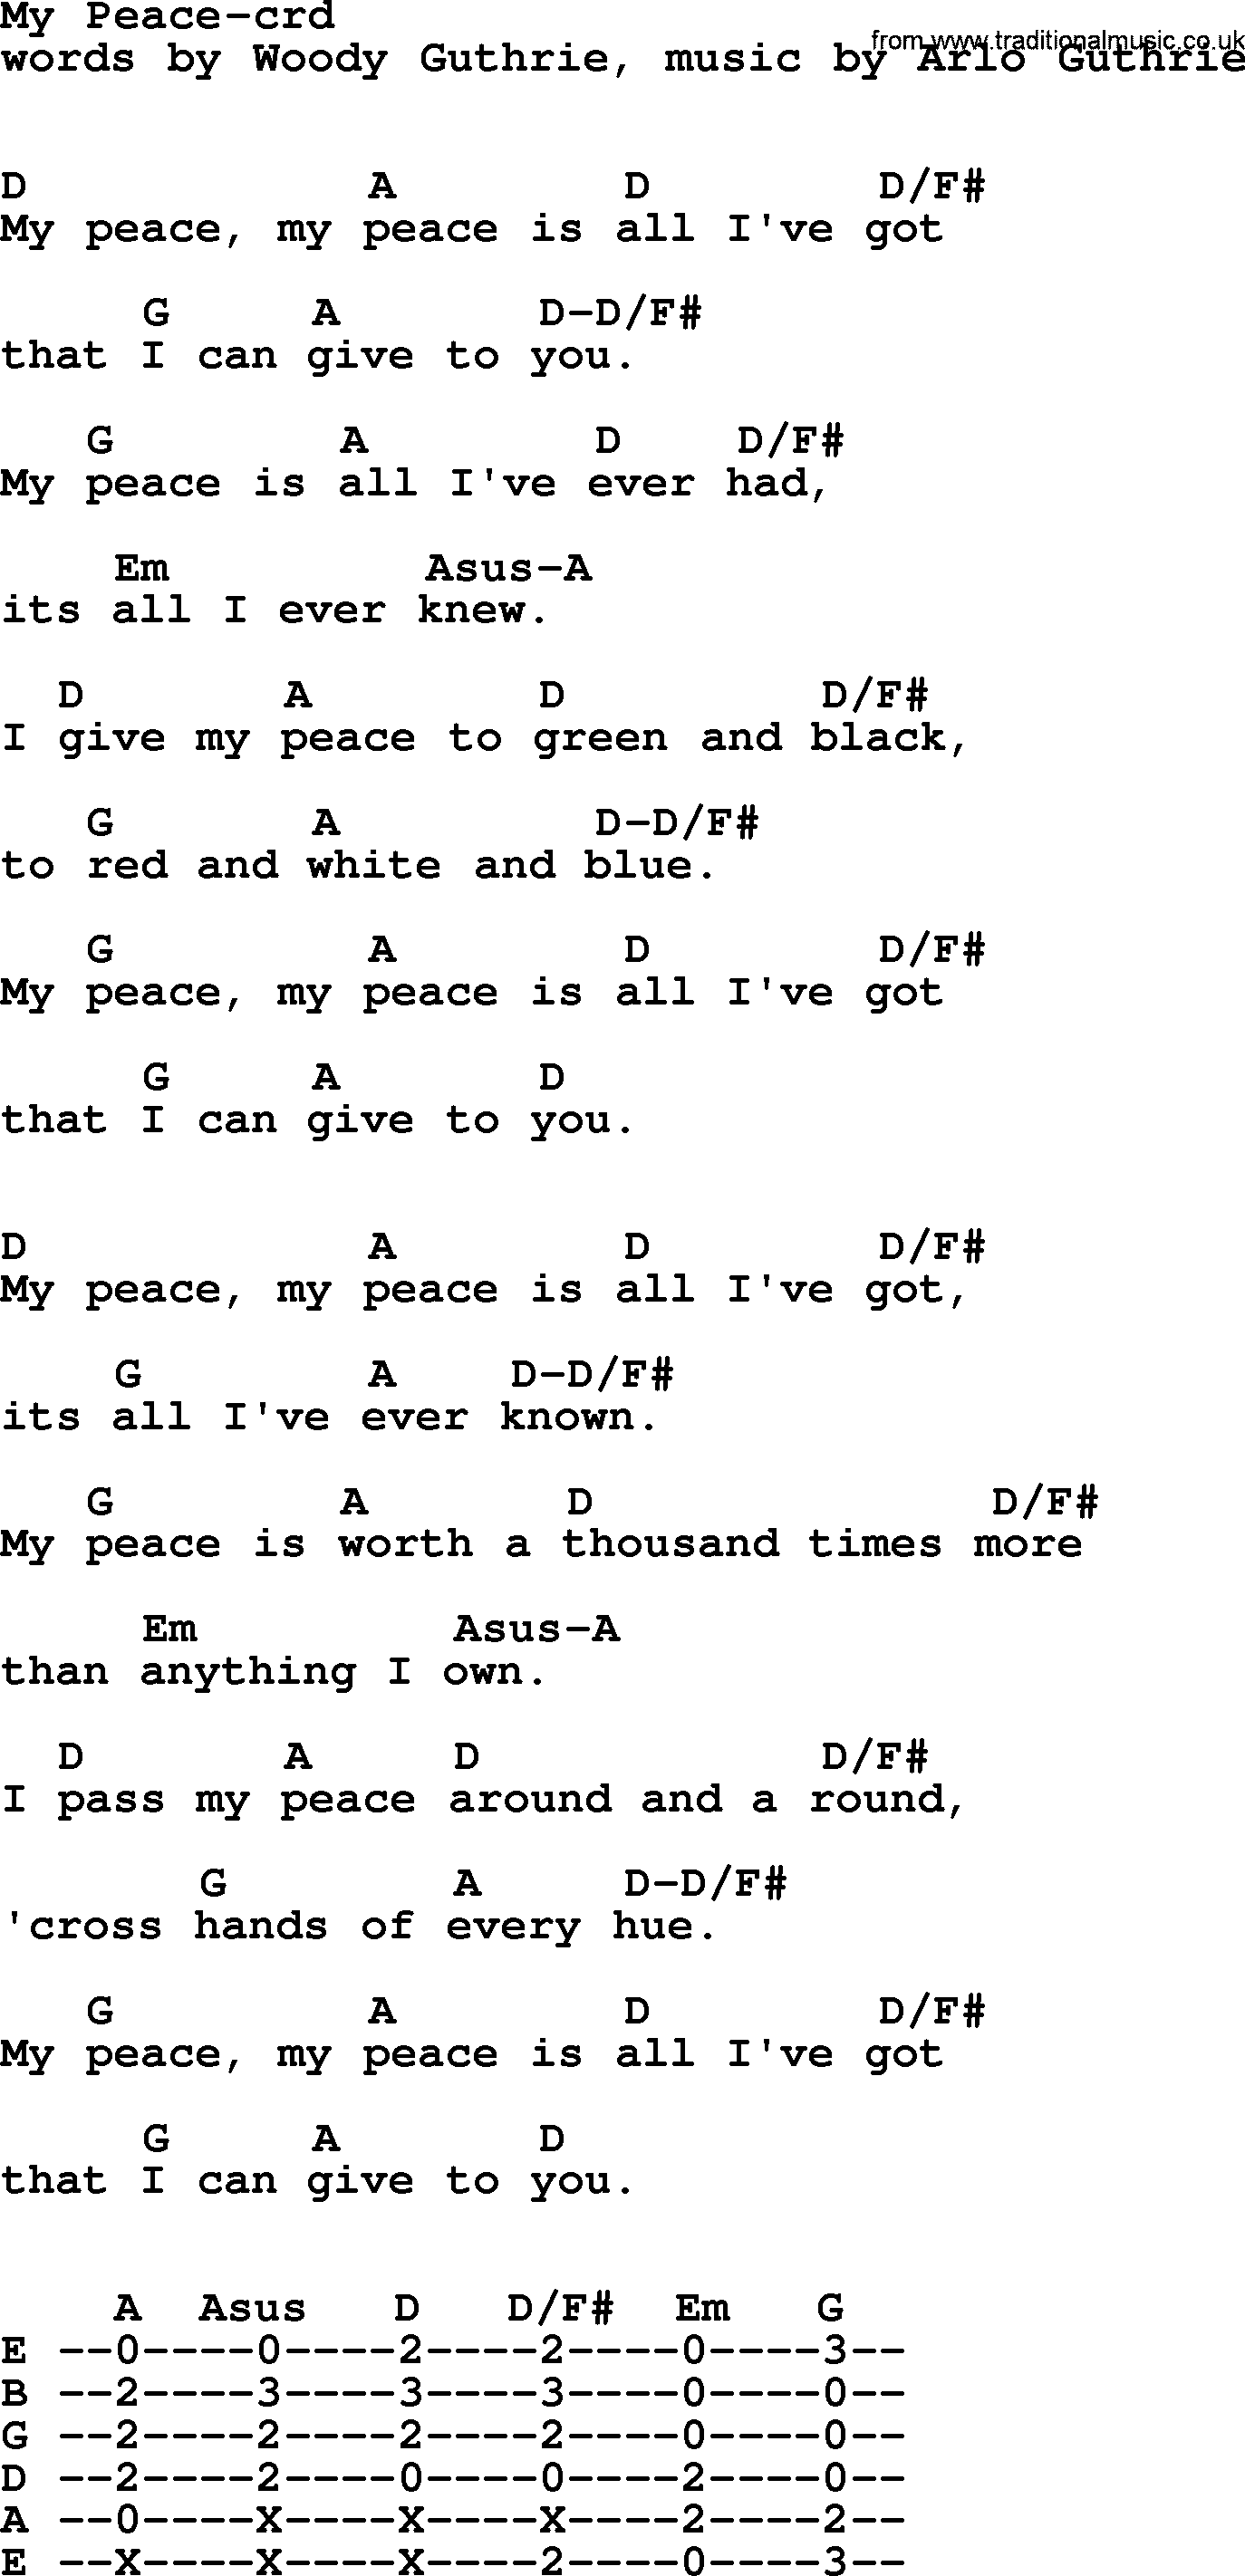 Woody Guthrie song My Peace lyrics and chords